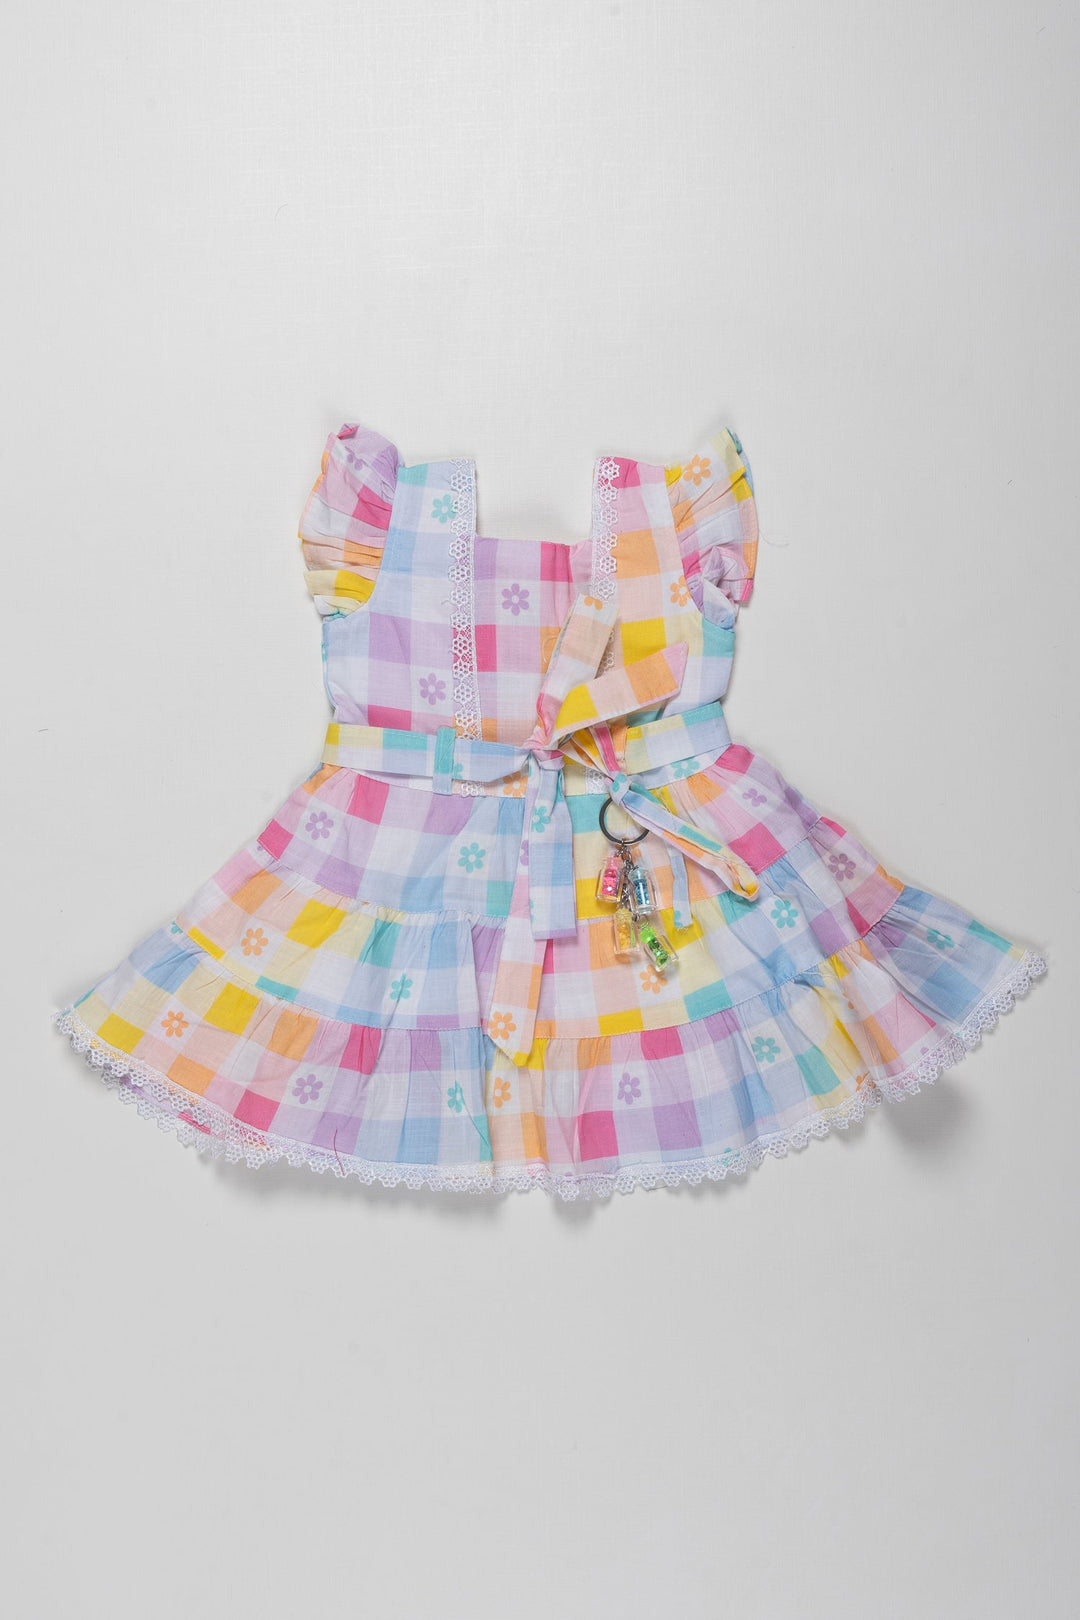 The Nesavu Girls Cotton Frock Charming Pastel Check & Floral Cotton Frock for Girls - Perfect for Every Day Nesavu 14 (6M) / multicolor / Cotton GFC1286B-14 Pastel Floral Cotton Dress for Girls | Daily Wear Chic | The Nesavu